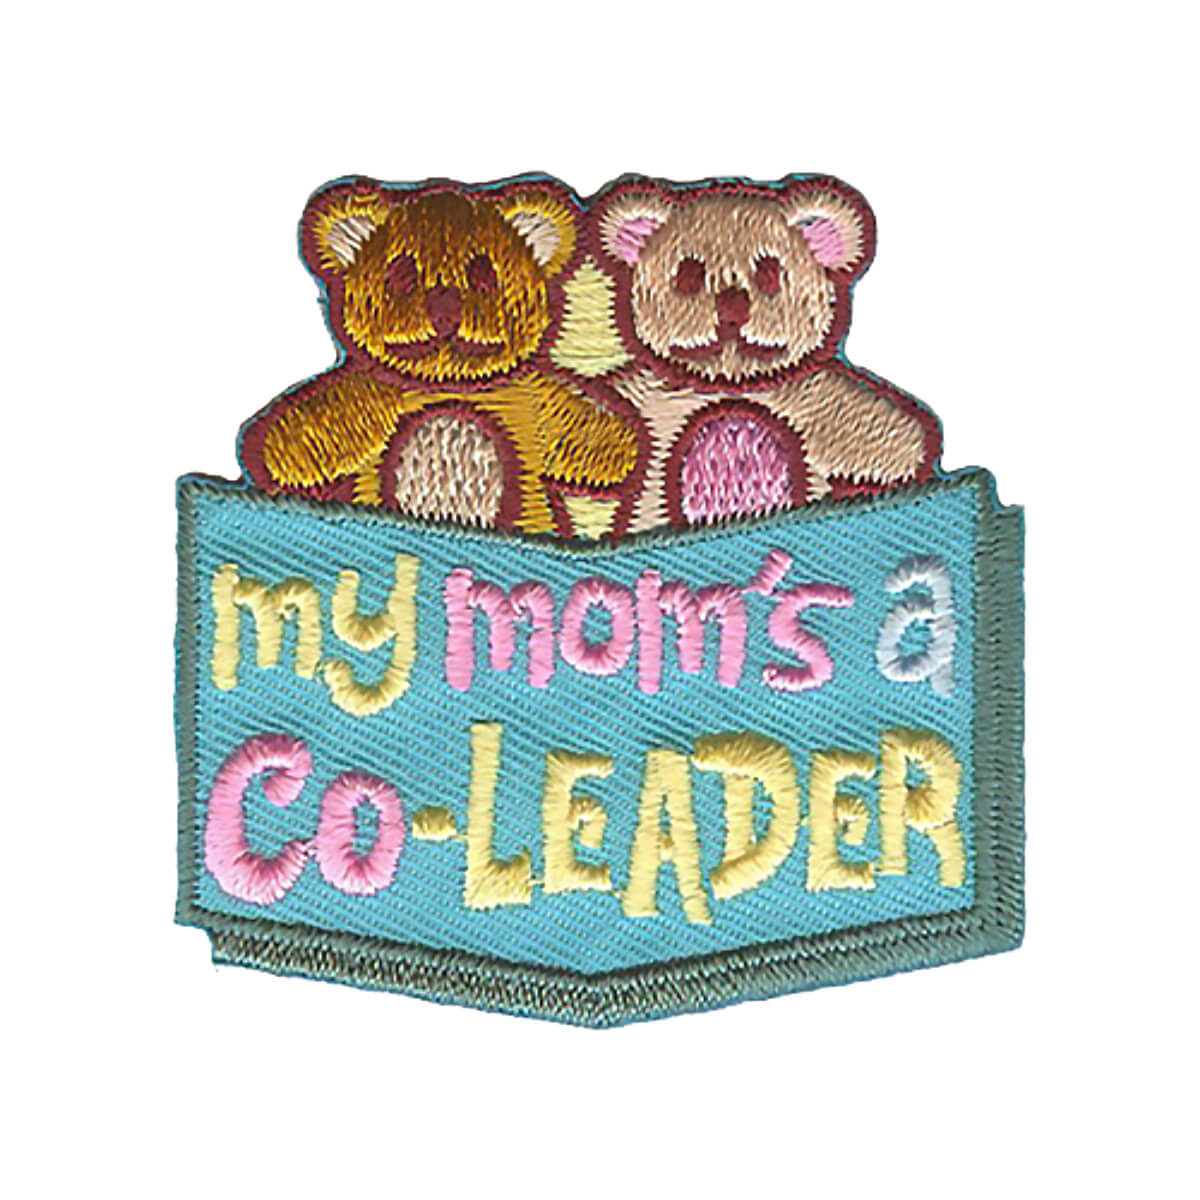 My Mom's A Co-Leader - W